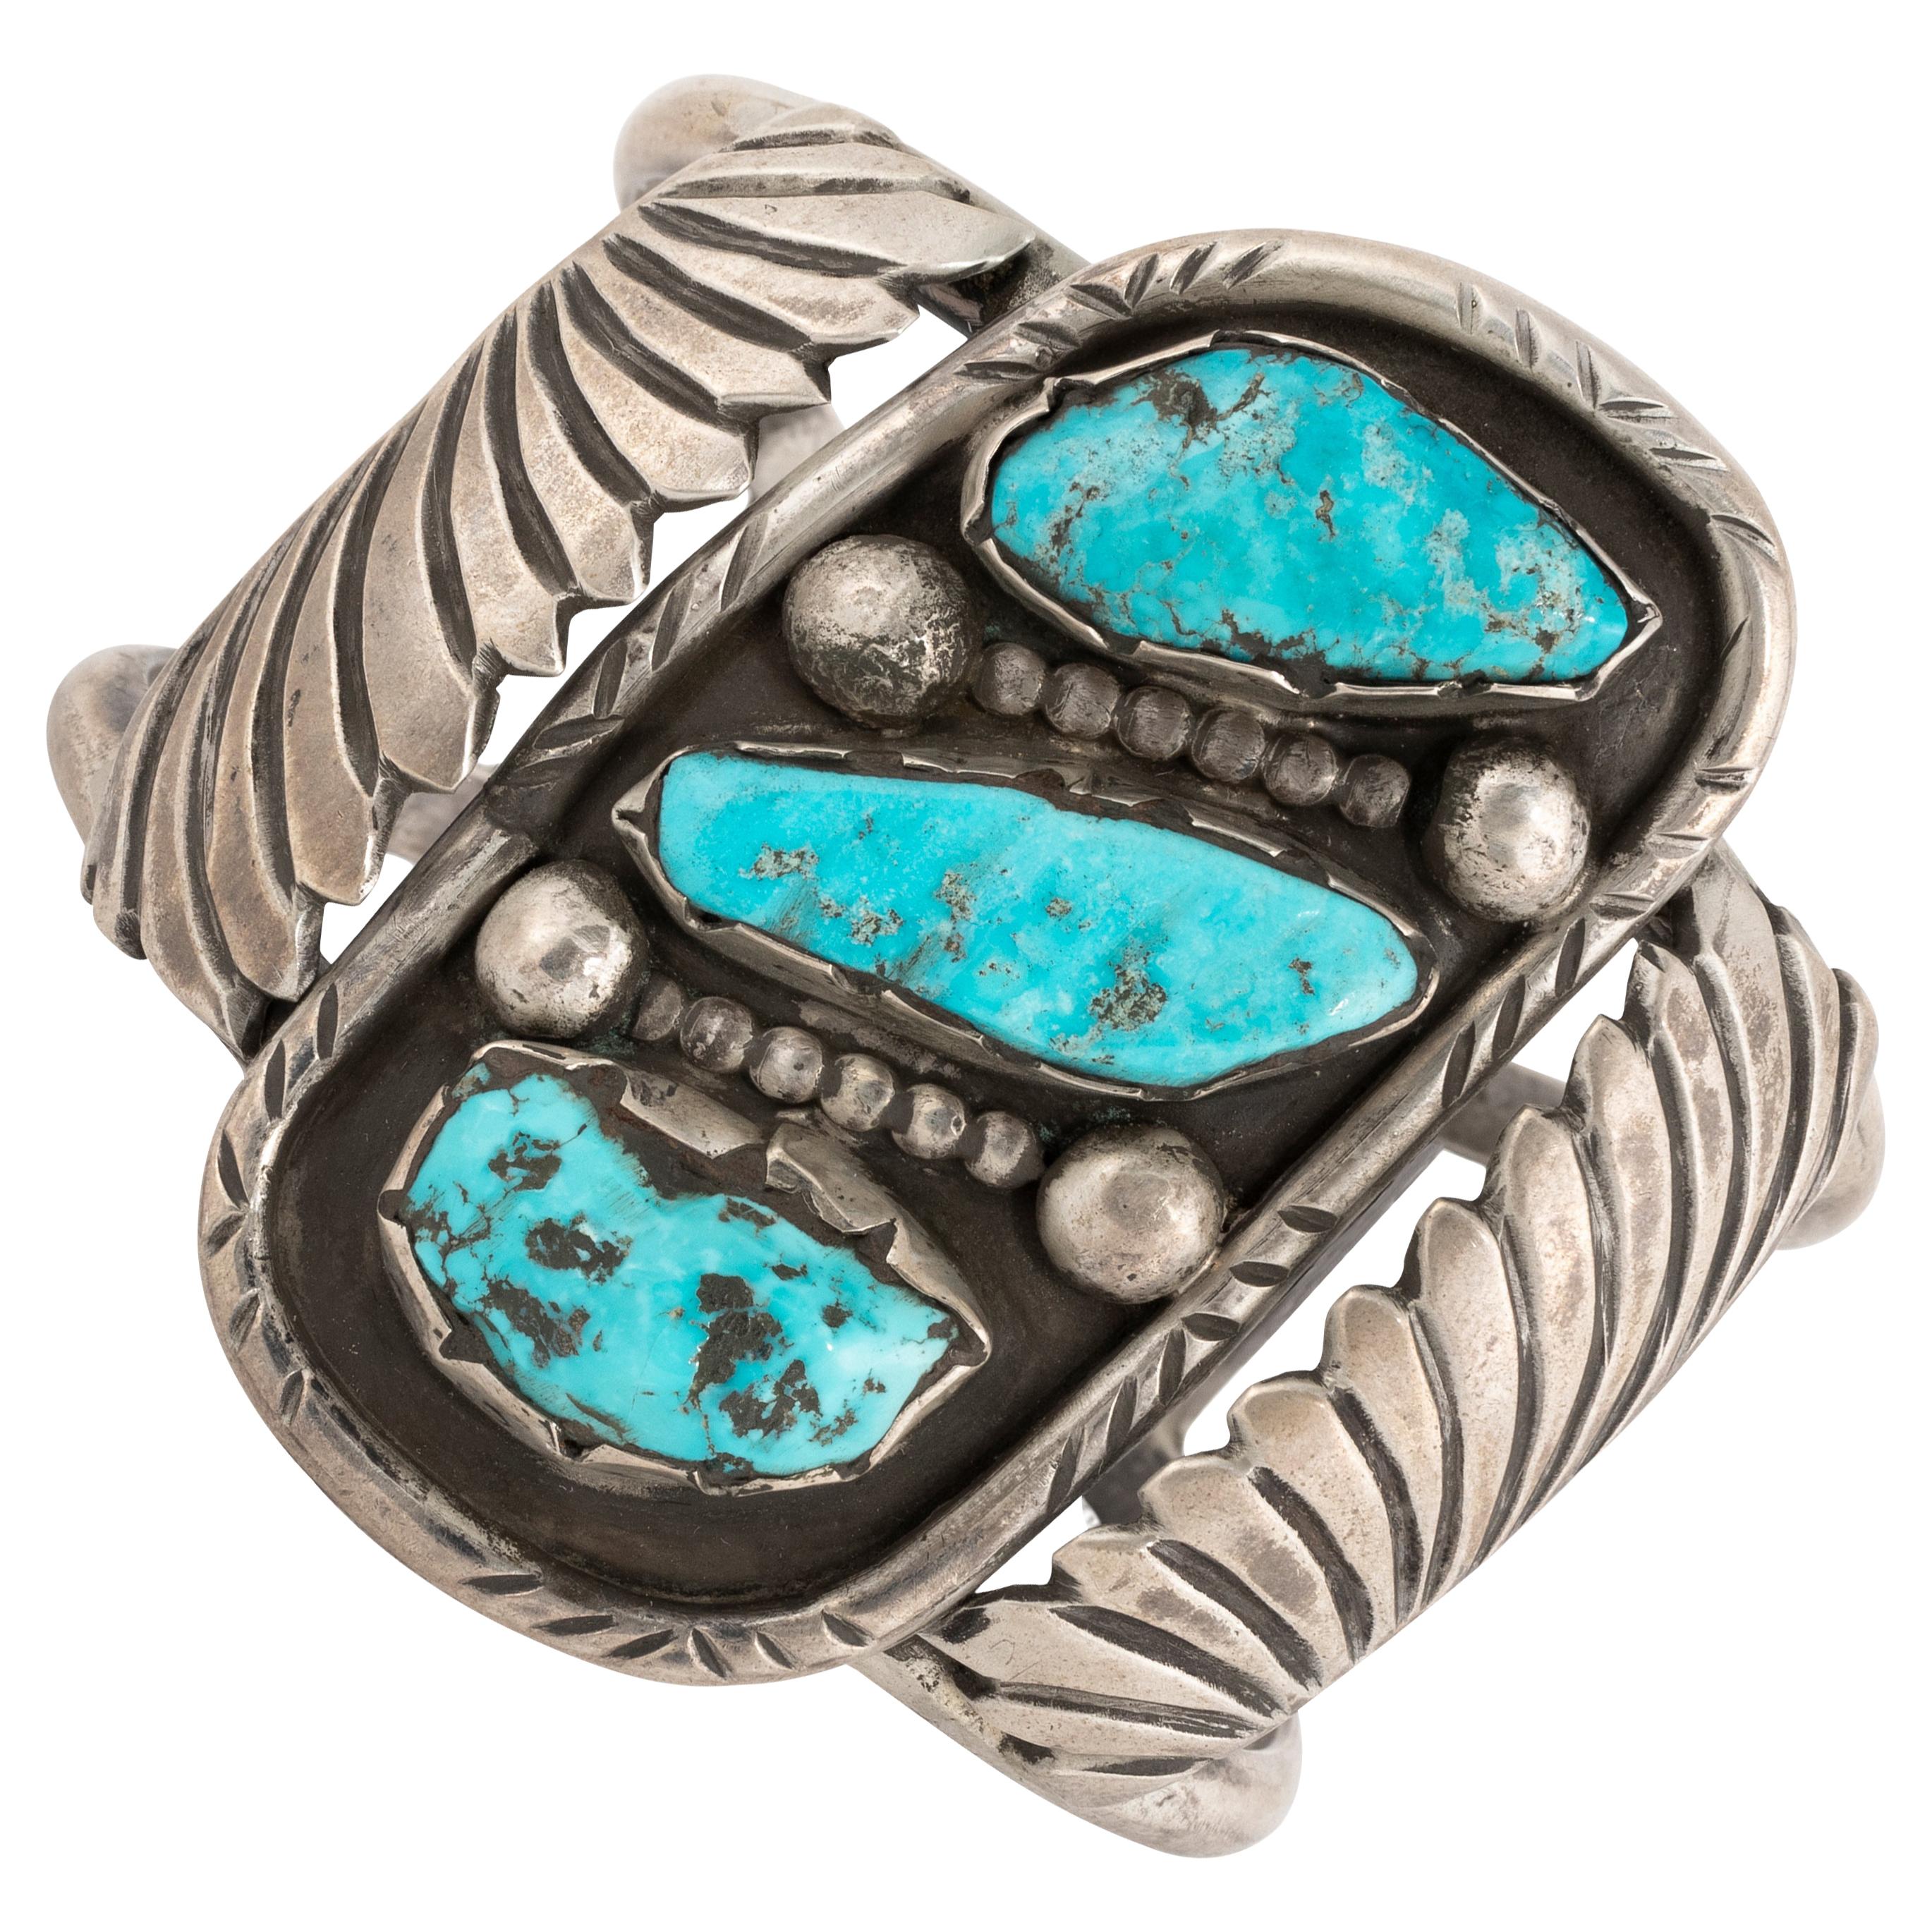 Navajo Morenci Turquoise and Sterling Bracelet